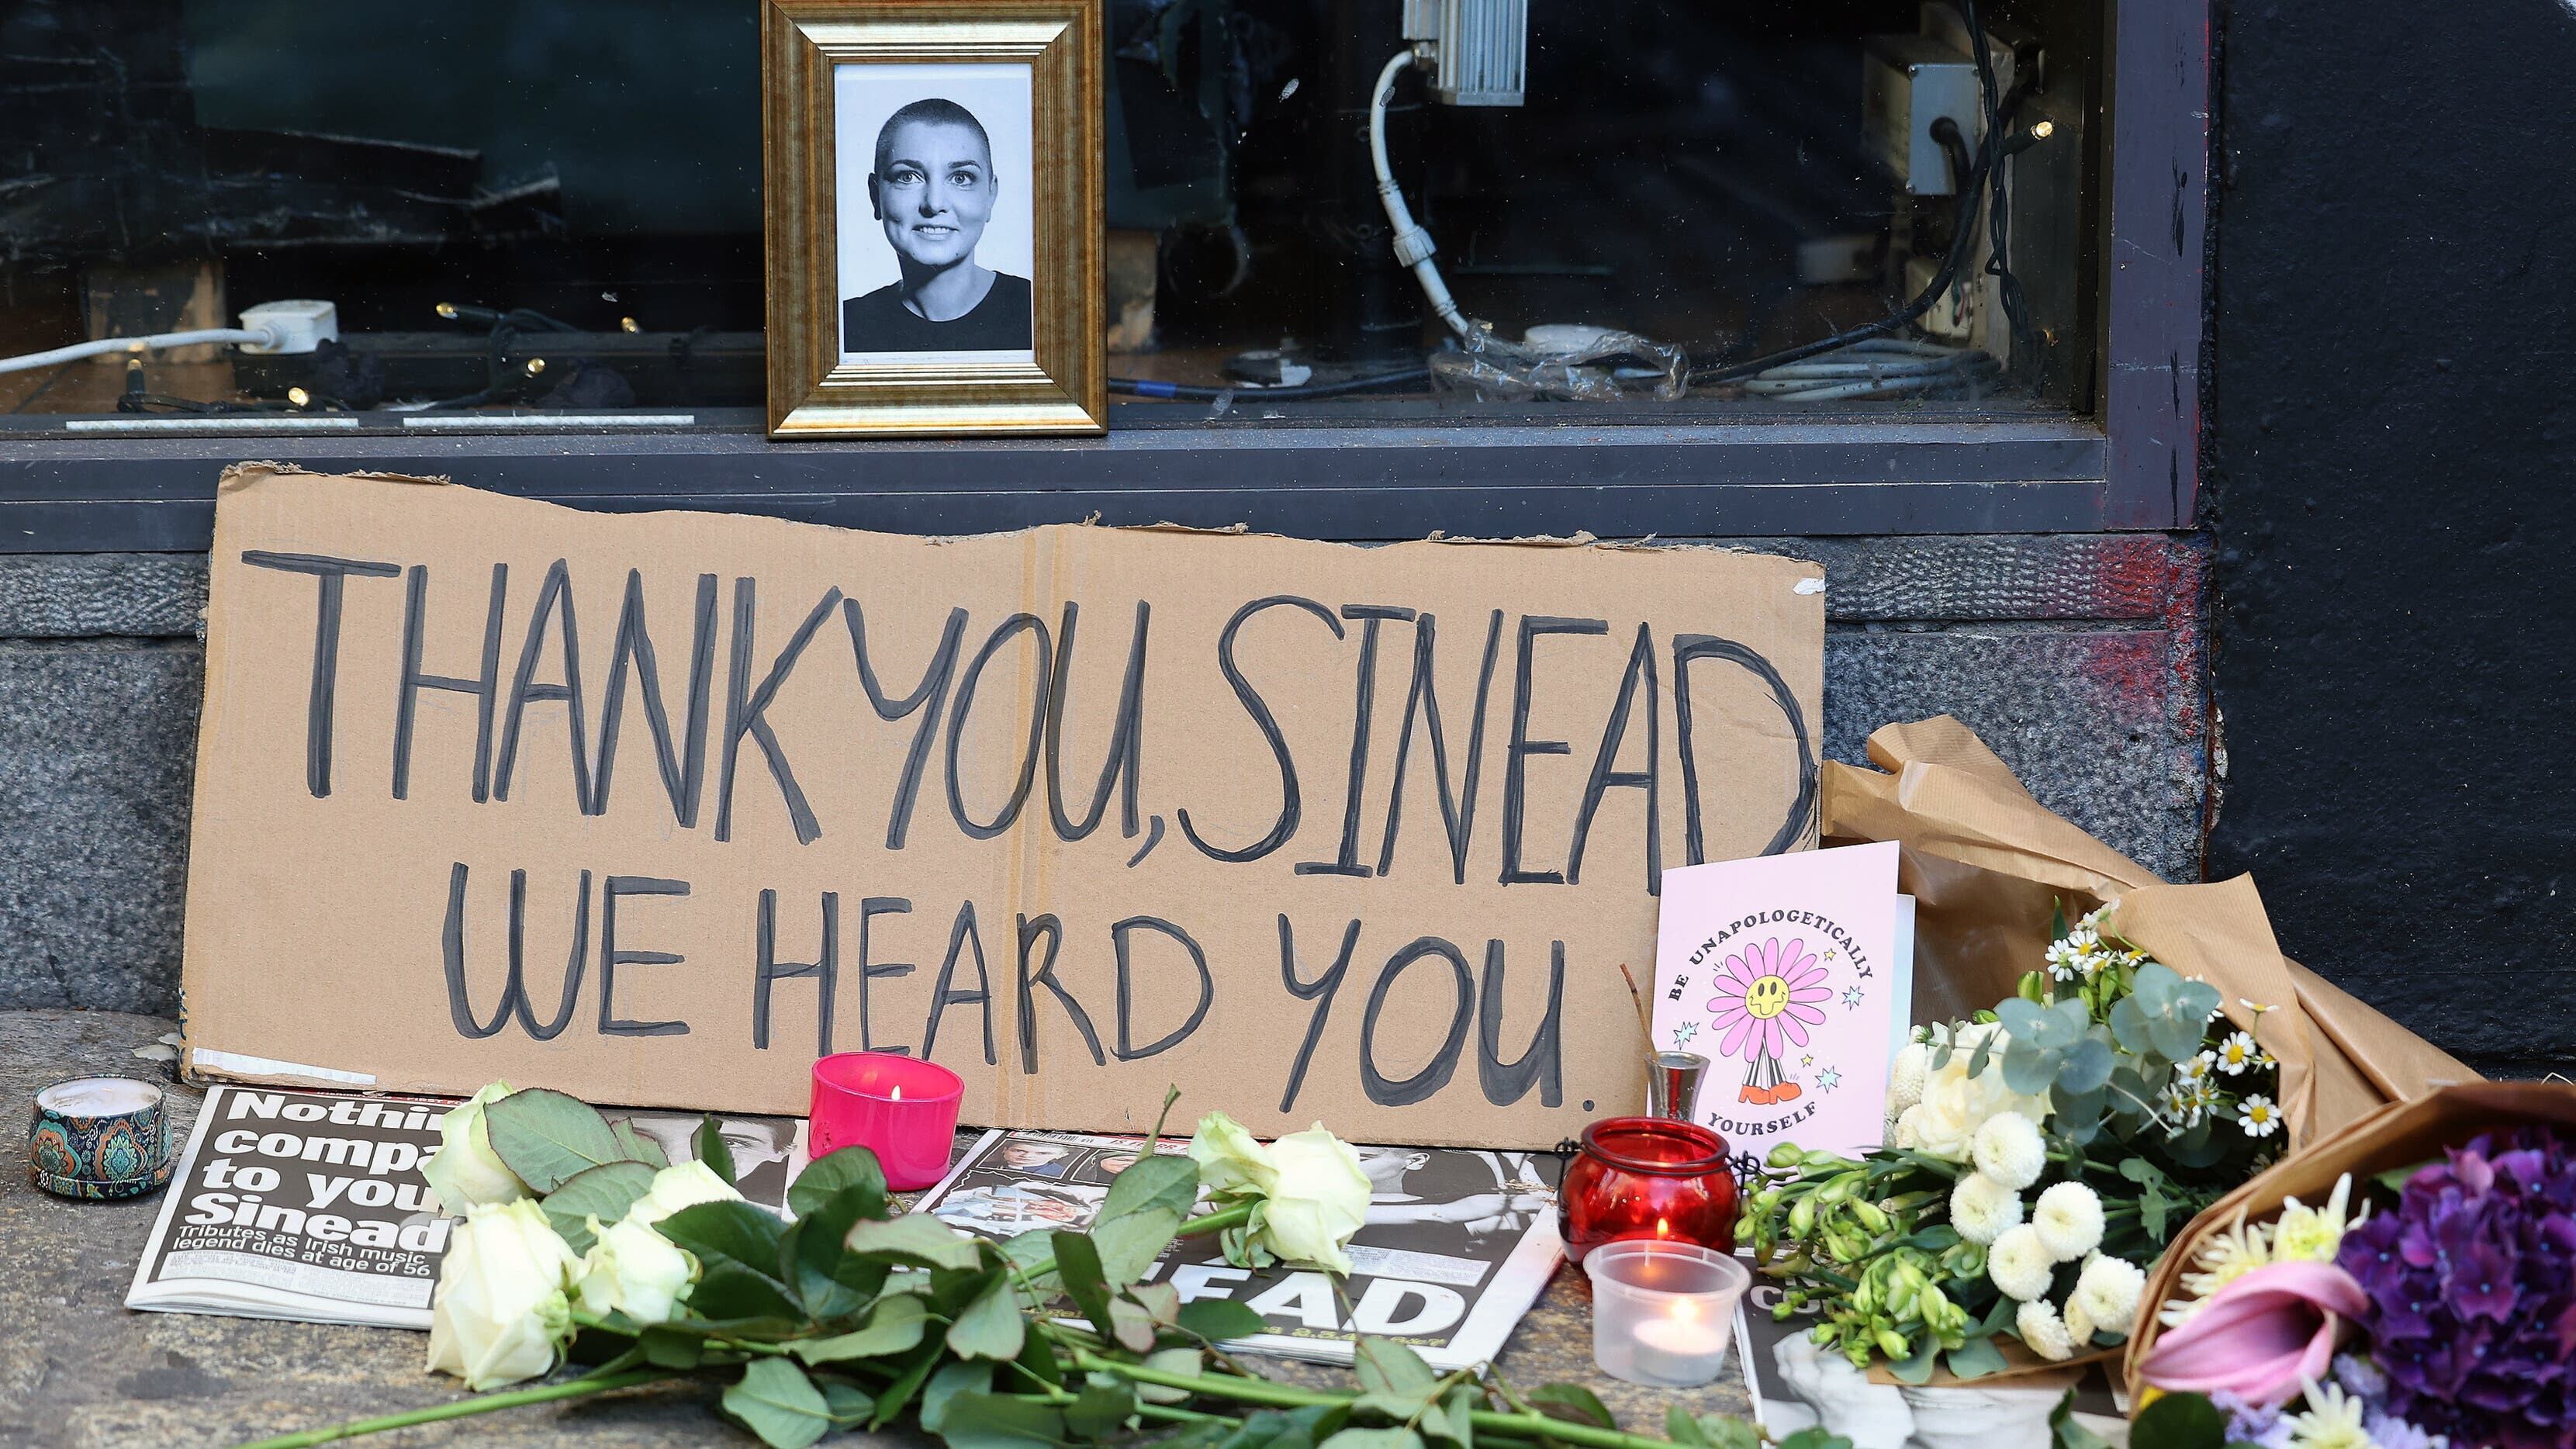 Tributes to Sinead O’Connor at the Irish Rock ‘n’ Roll Museum in the Temple Bar area of Dublin (Damien Eagers/PA)